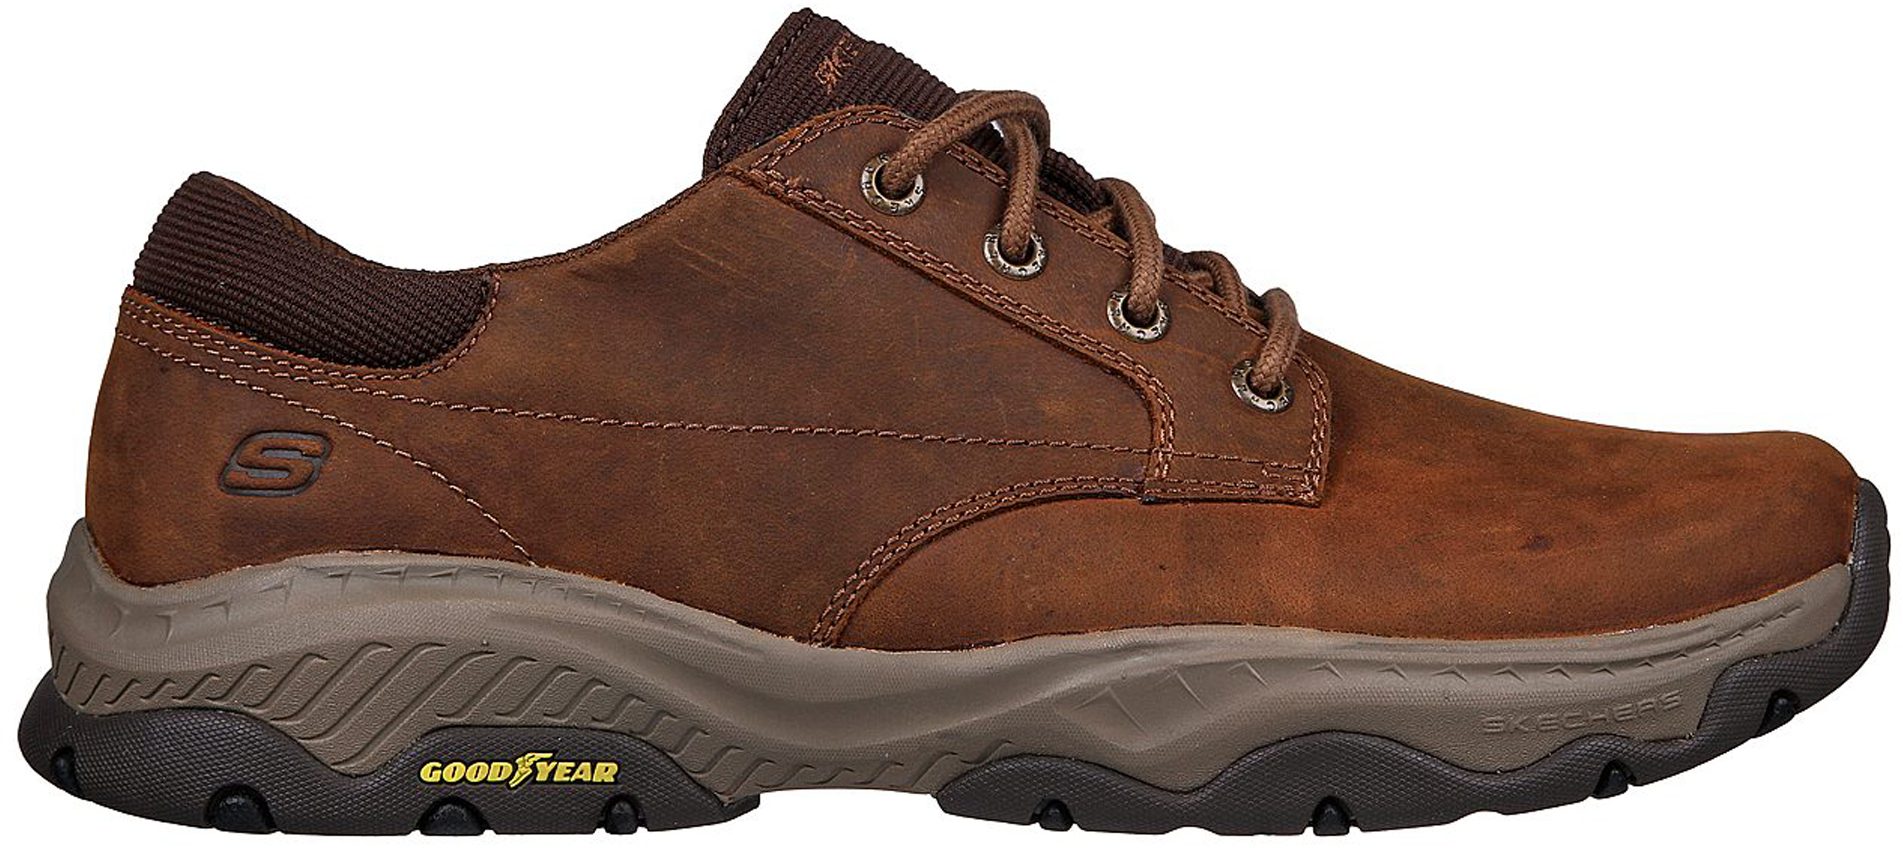 Skechers Relaxed Fit: Craster - Fenzo Brown 204716 CDB - Casual Shoes ...